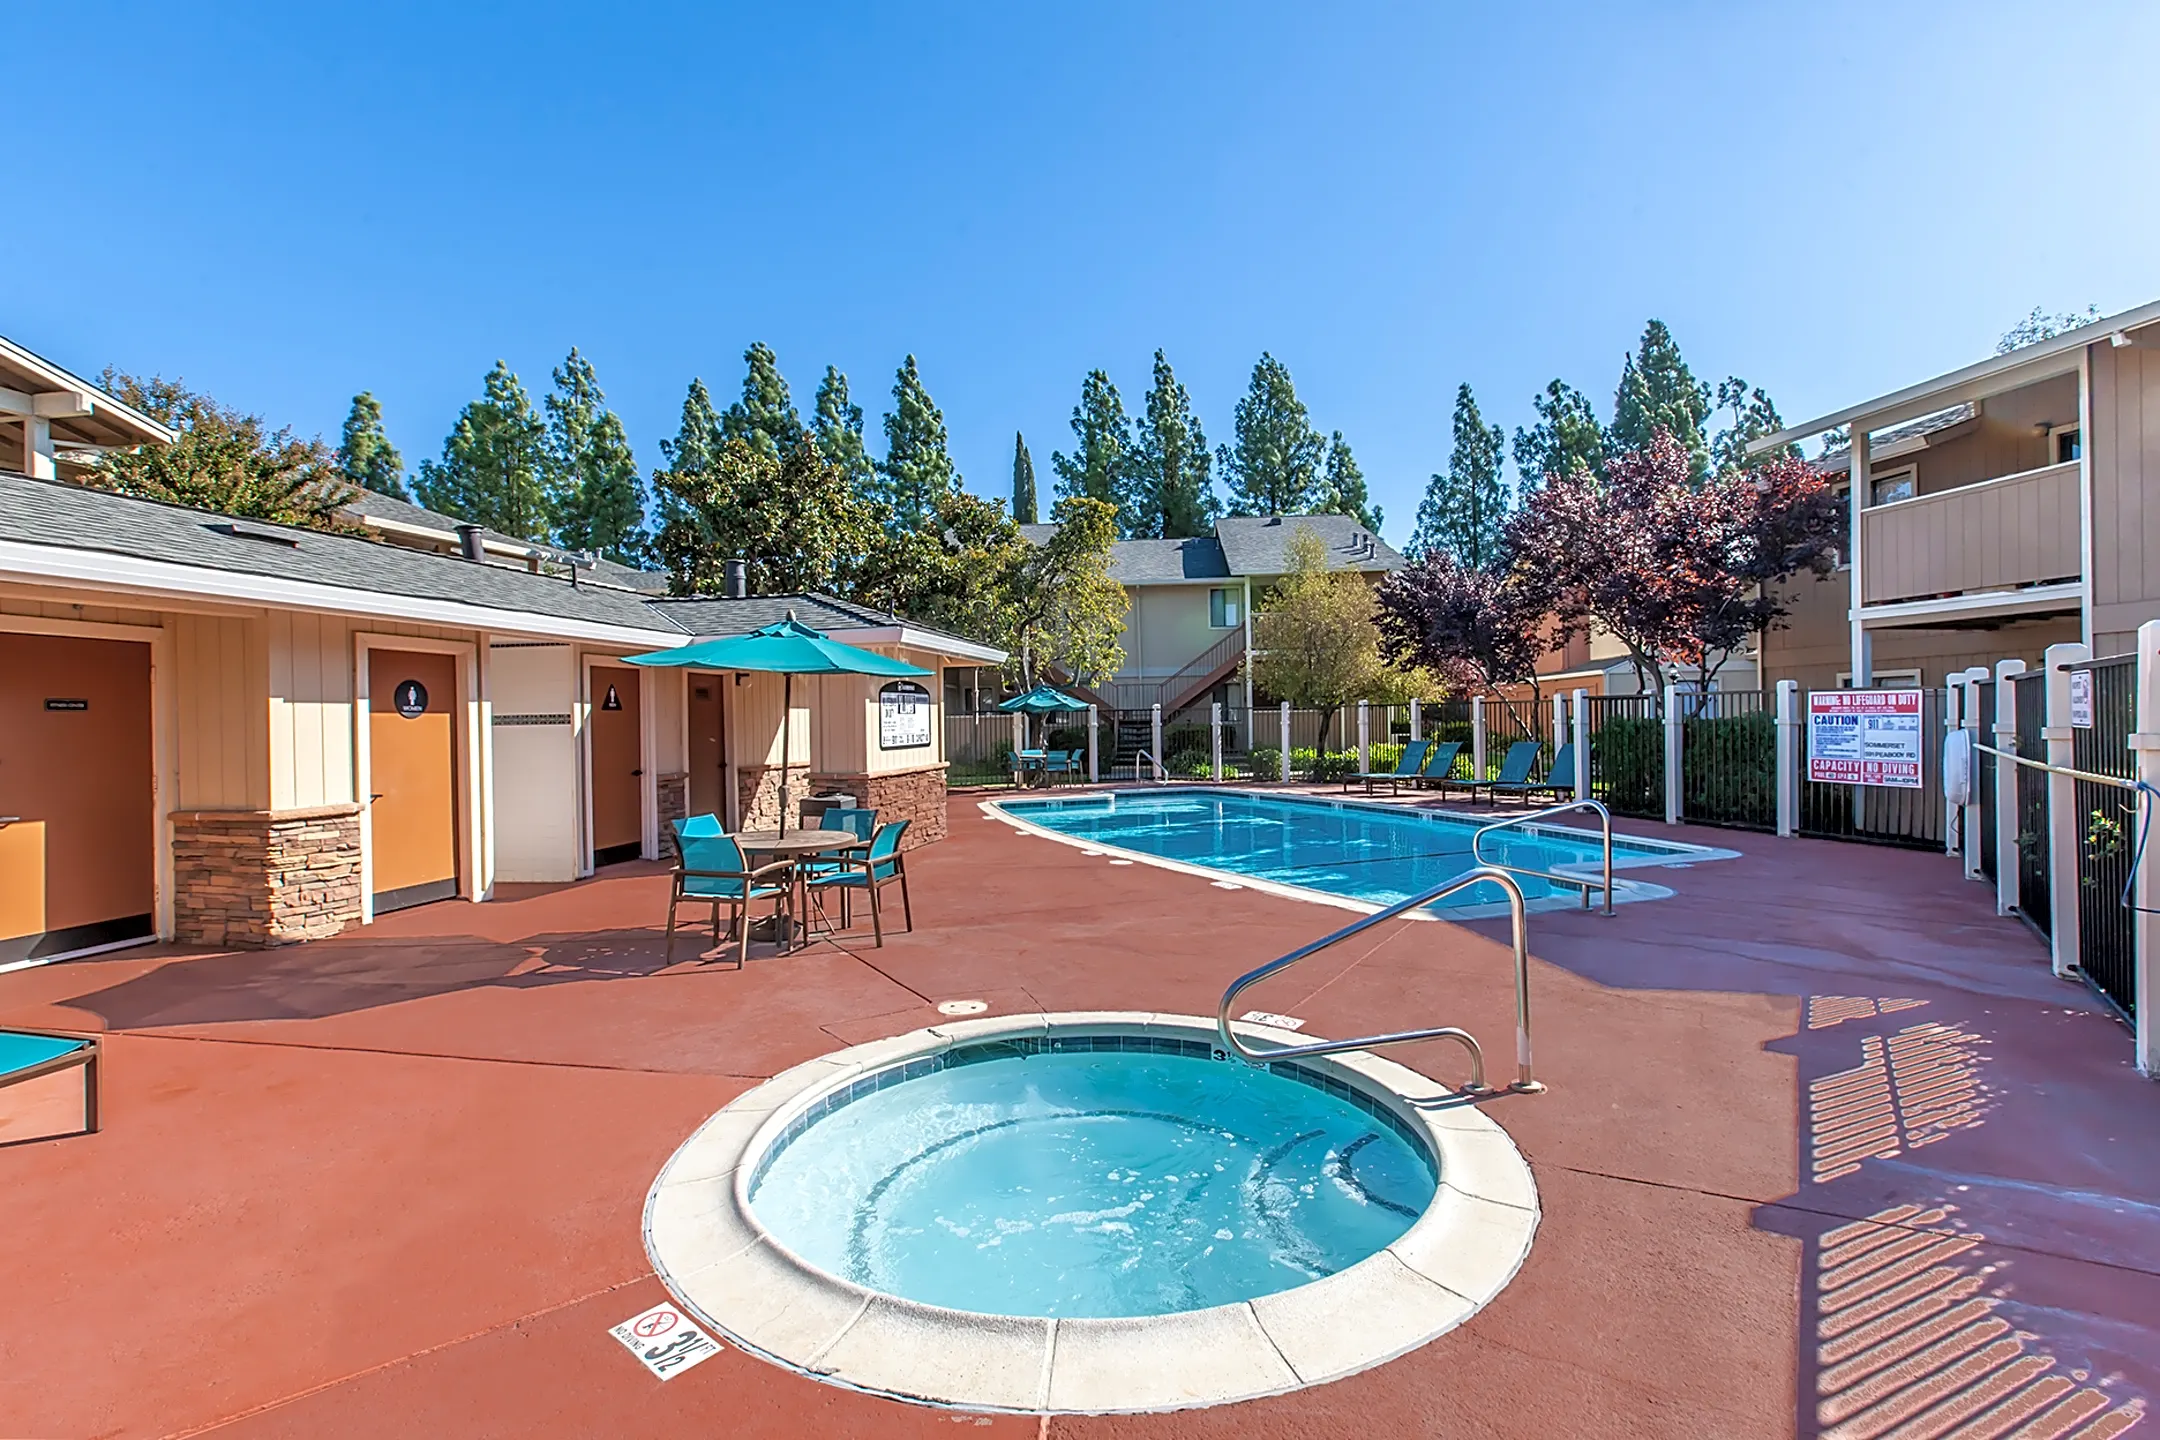 Pool - Sommerset - Vacaville, CA